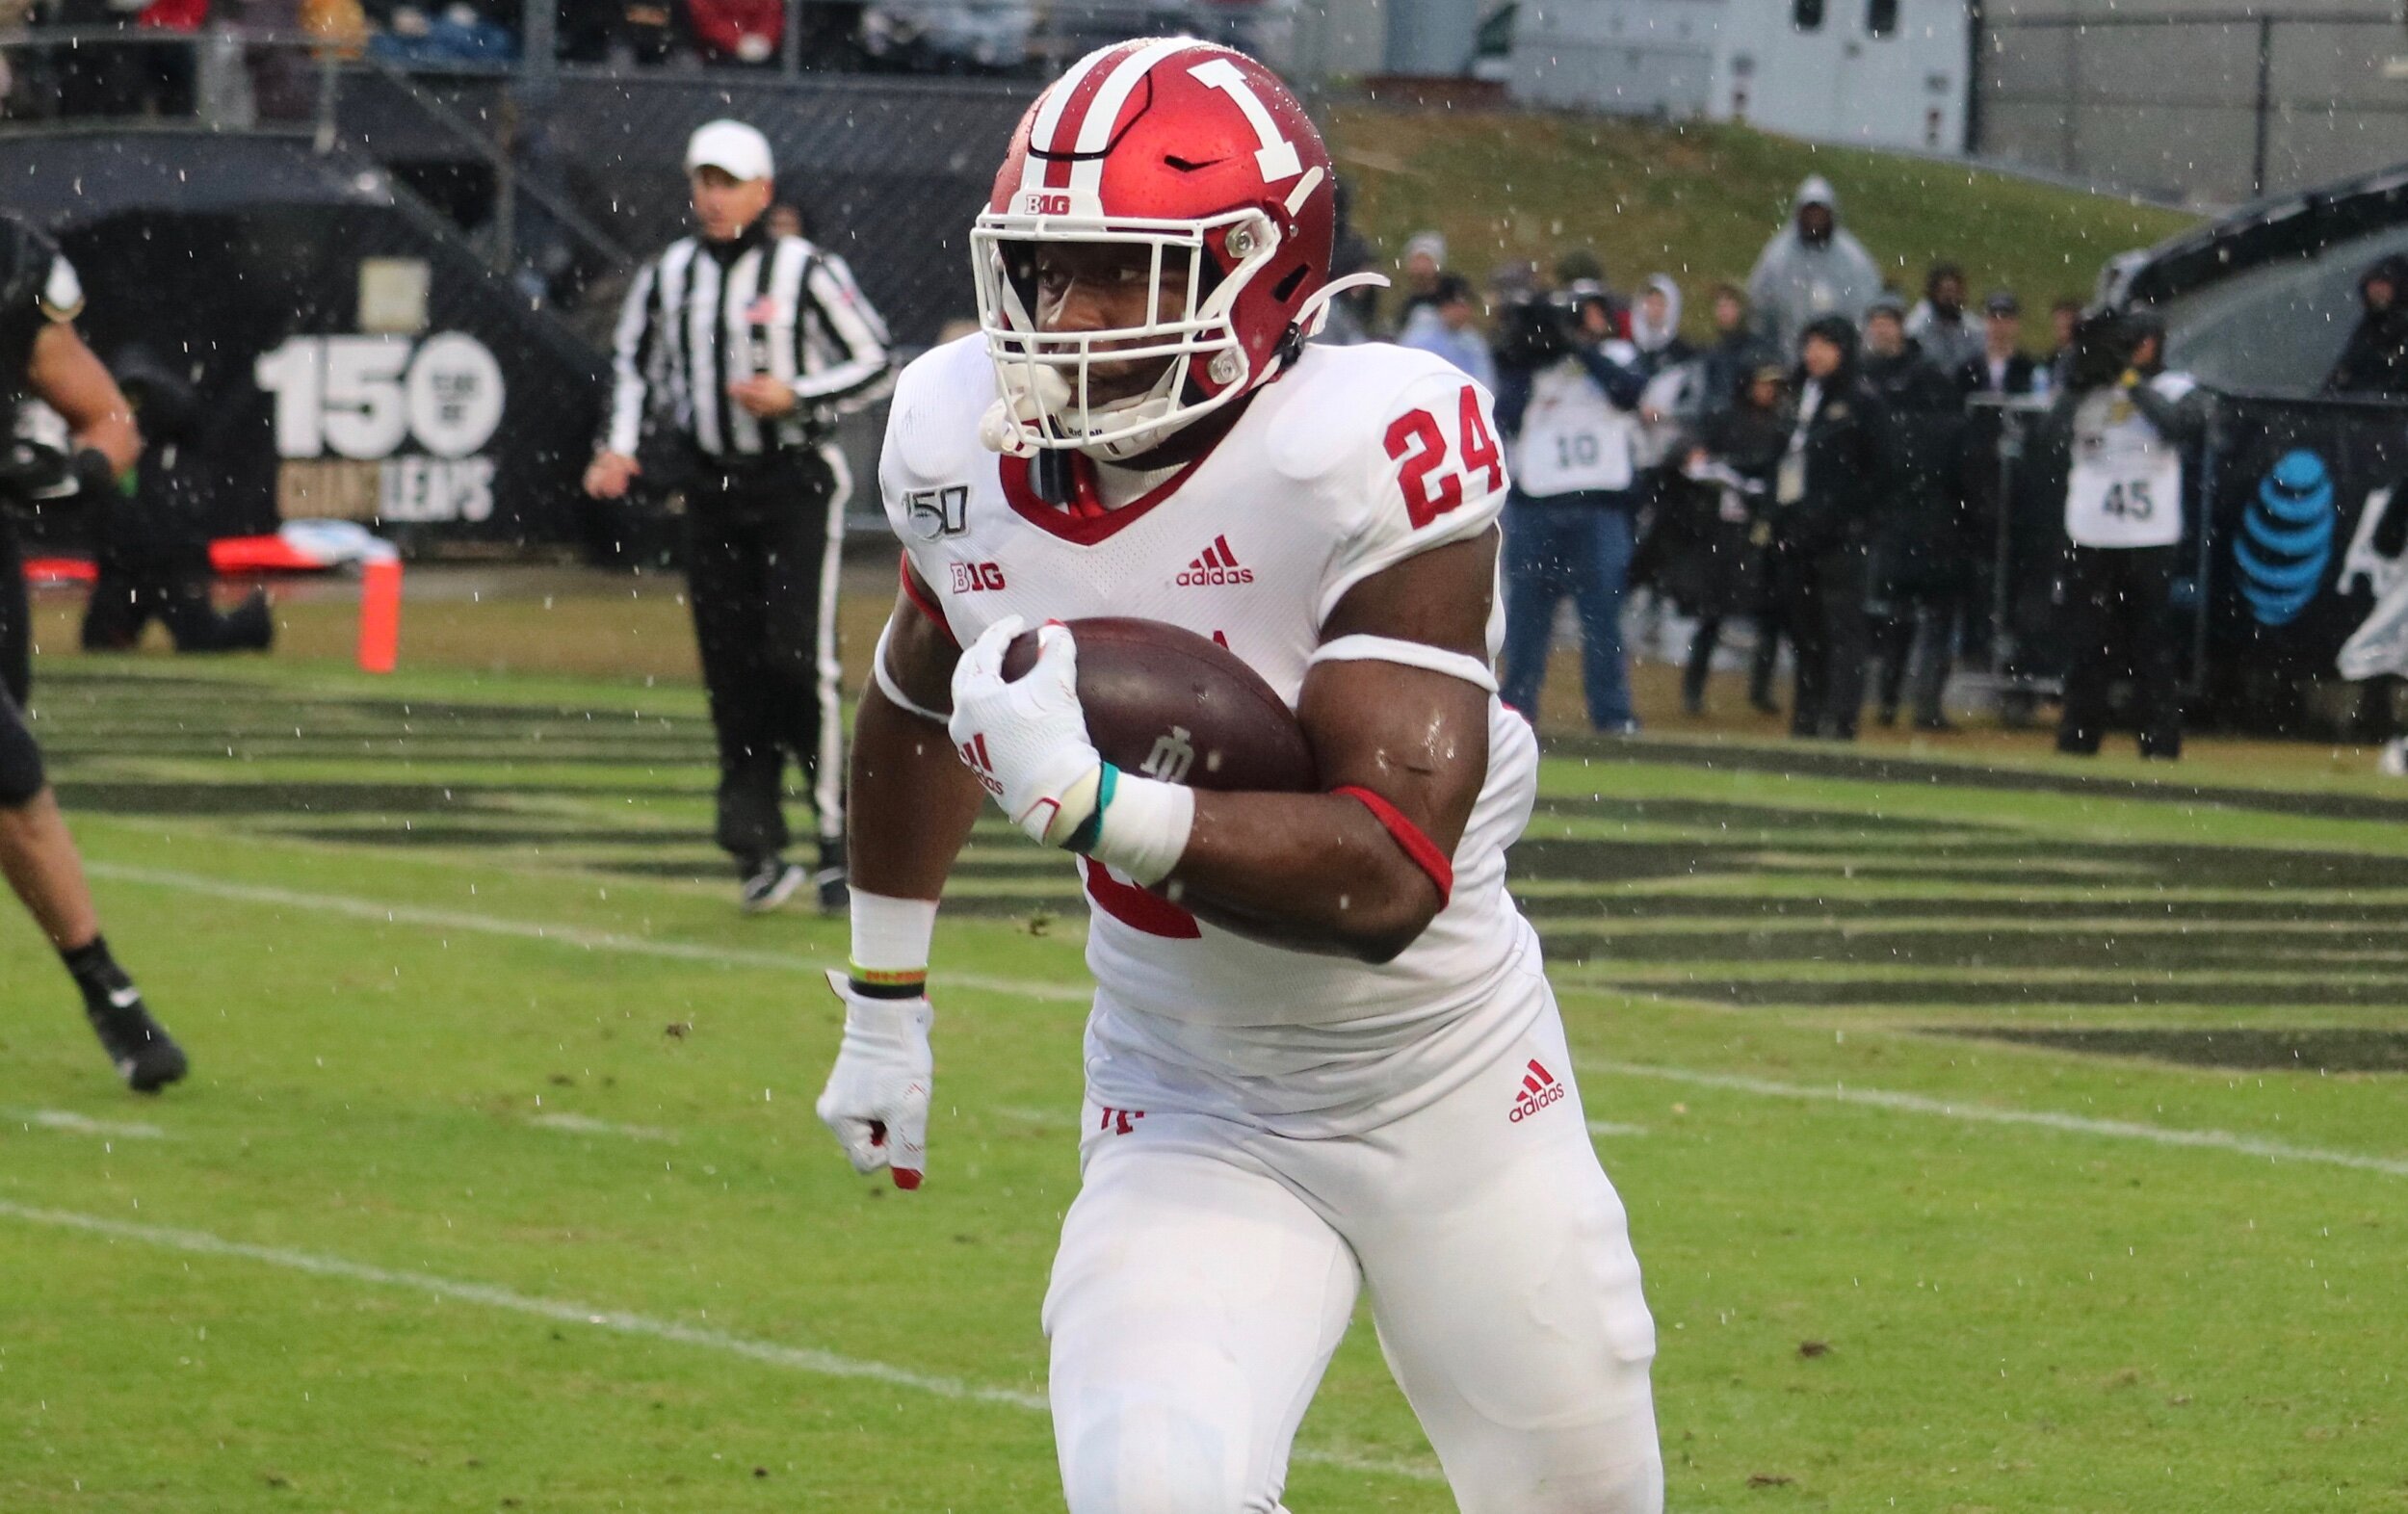  Freshman running back Sampson James gets his opportunity in the absence of Stevie Scott and runs with it, showcasing his potential with 118 rushing yards on 22 carries, and his third career touchdown in the Old Oaken Bucket victory.&nbsp; 